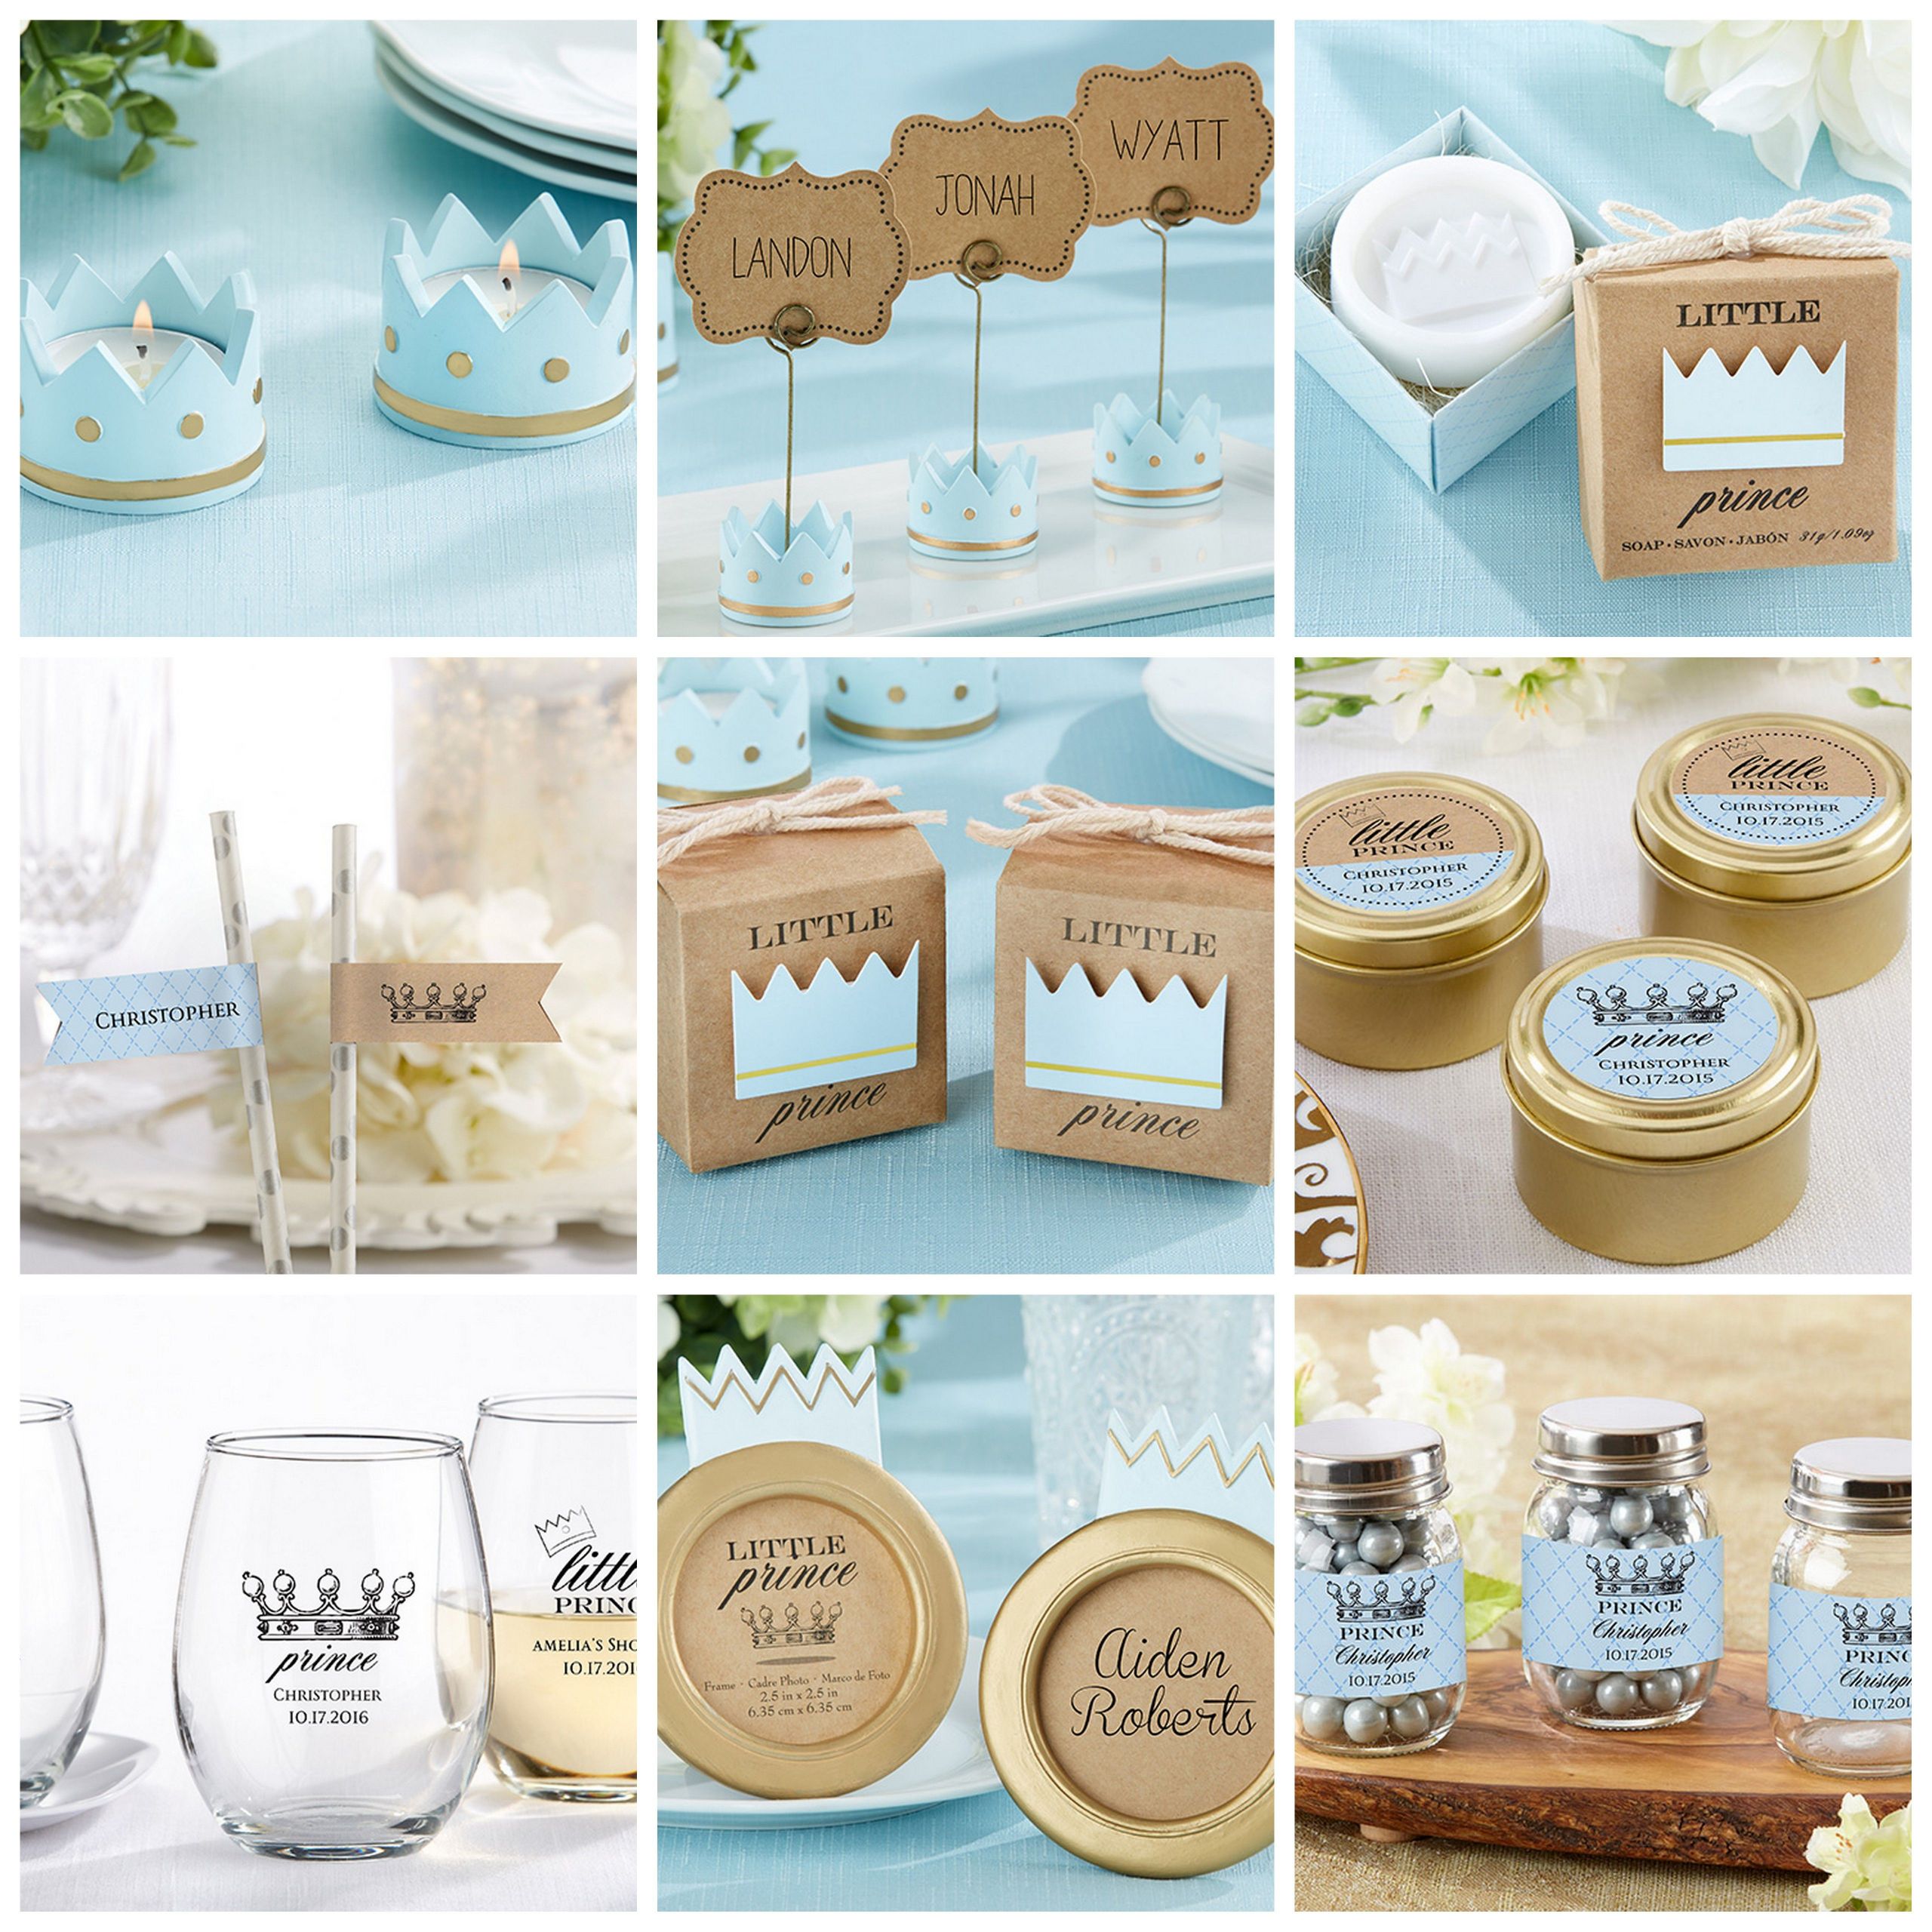 Baby Boy Shower Party Favors
 Little Prince Baby Shower Party Favors from HotRef